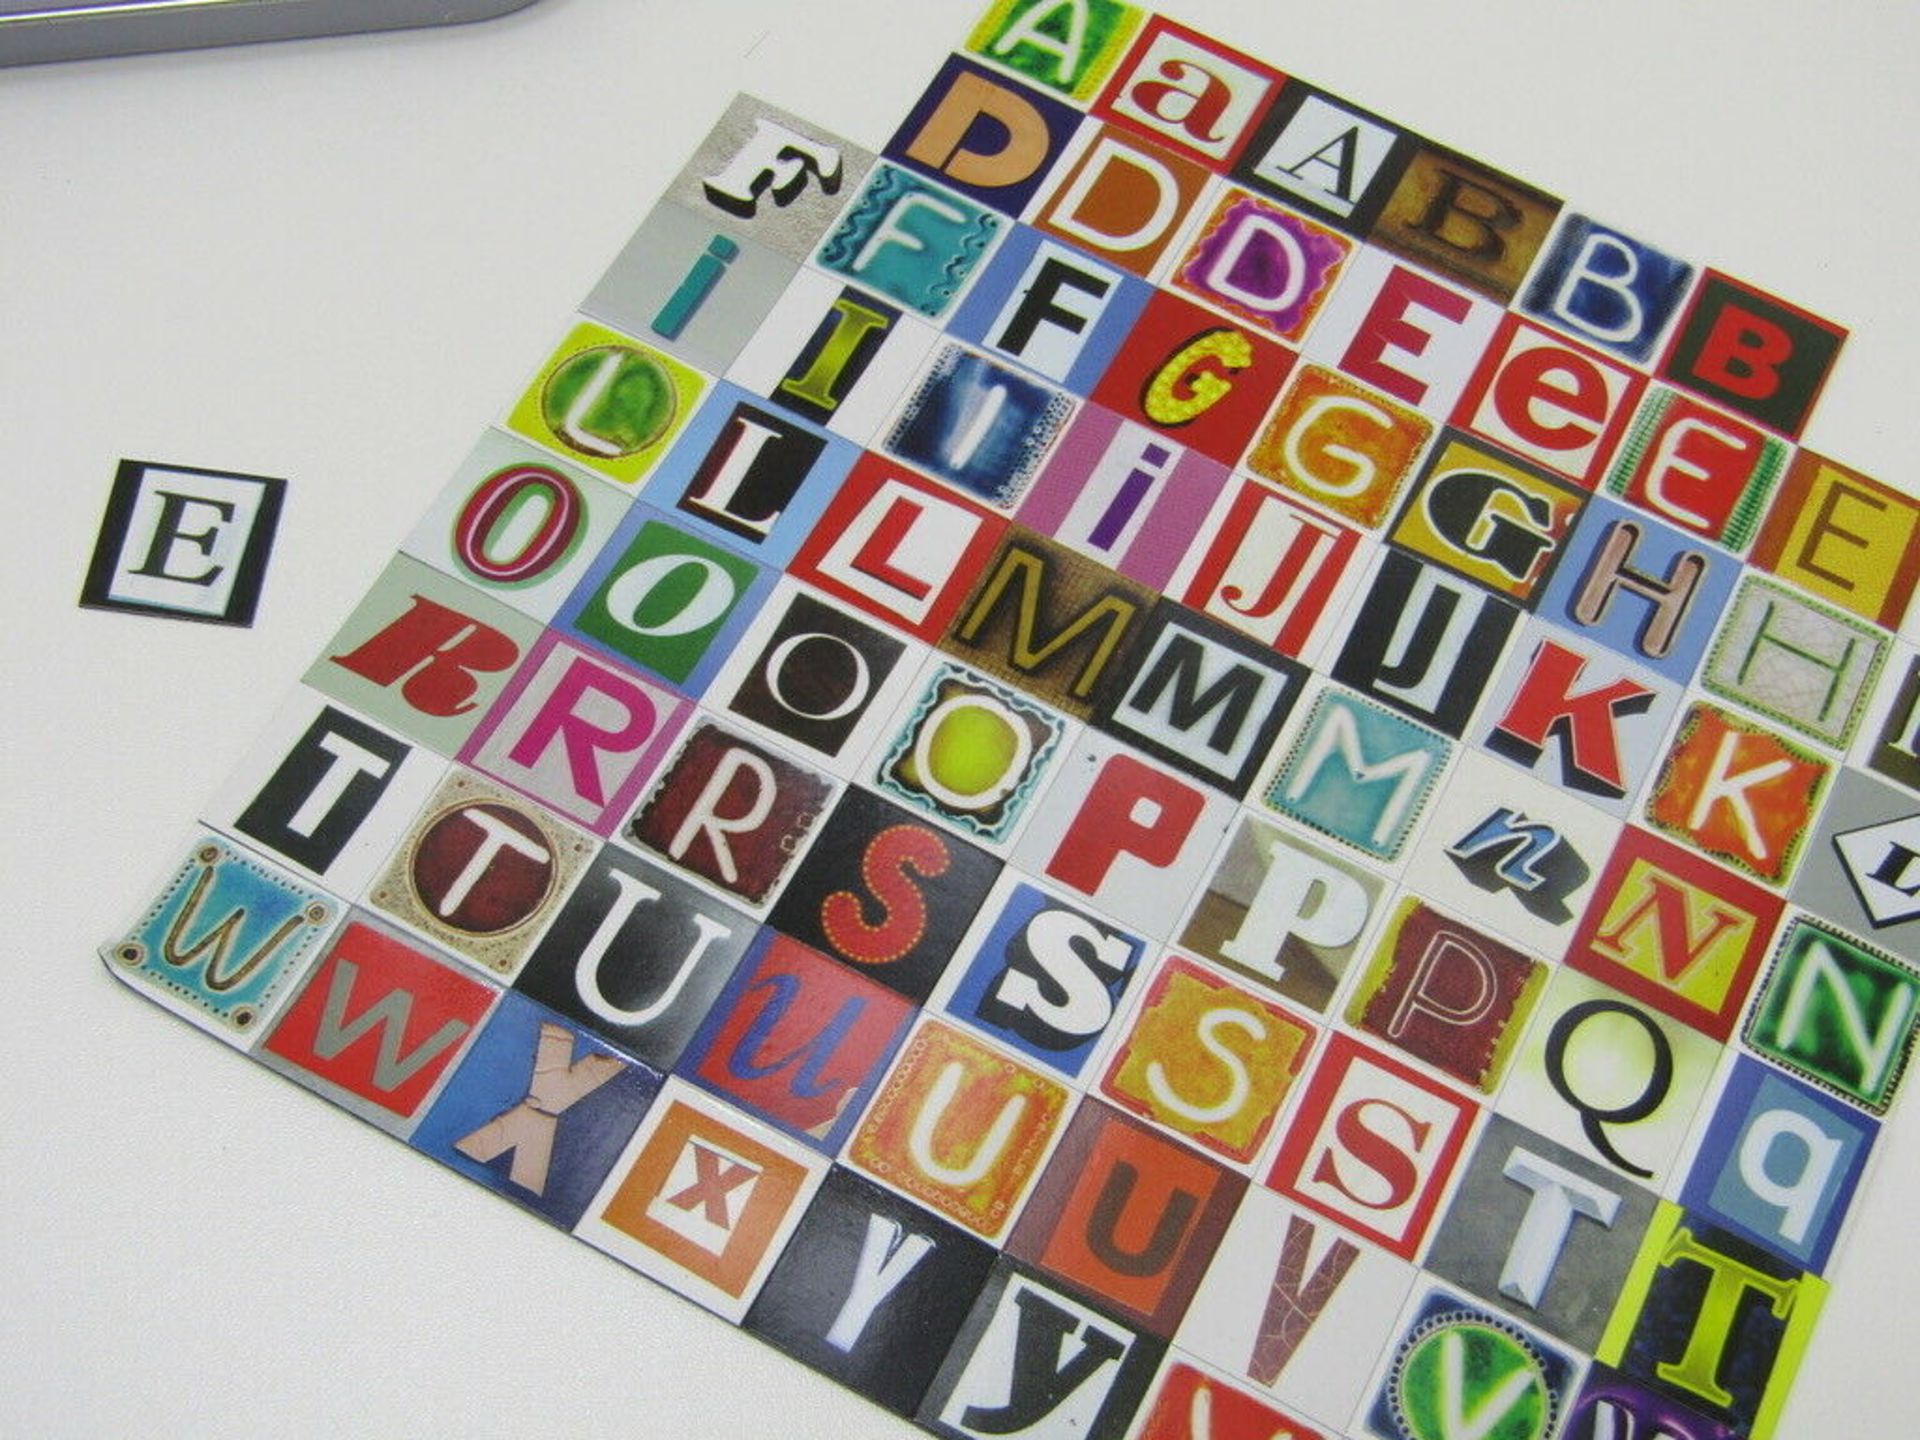 4 x Awesome Anagrams Puzzle Book & Magnet Set. Game. - Image 2 of 5